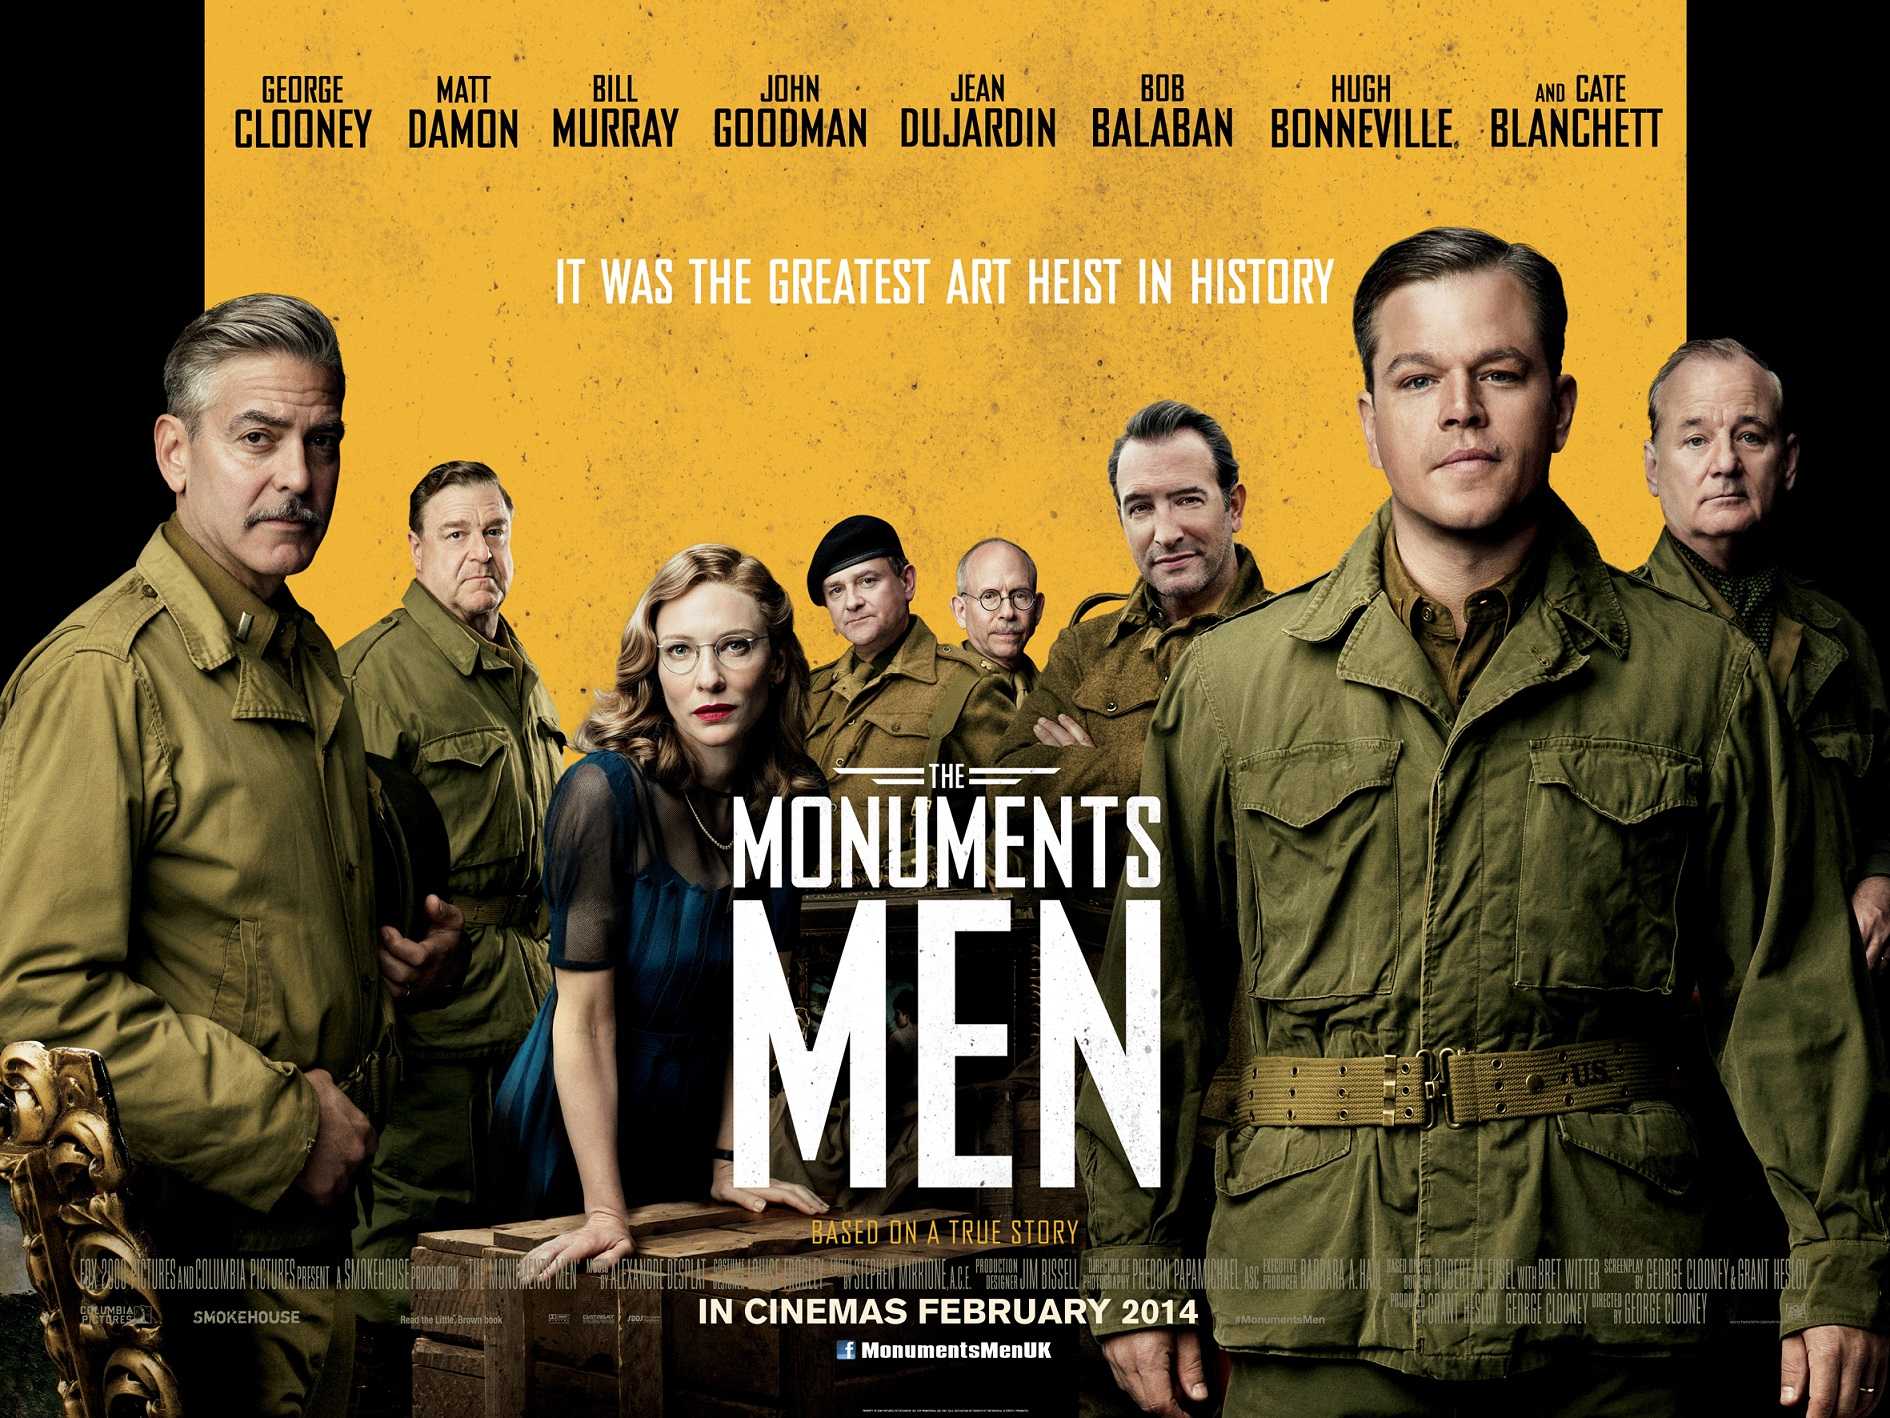 Book Vs. Film: “The Monuments Men” Disappoints – The Foothill Dragon Press